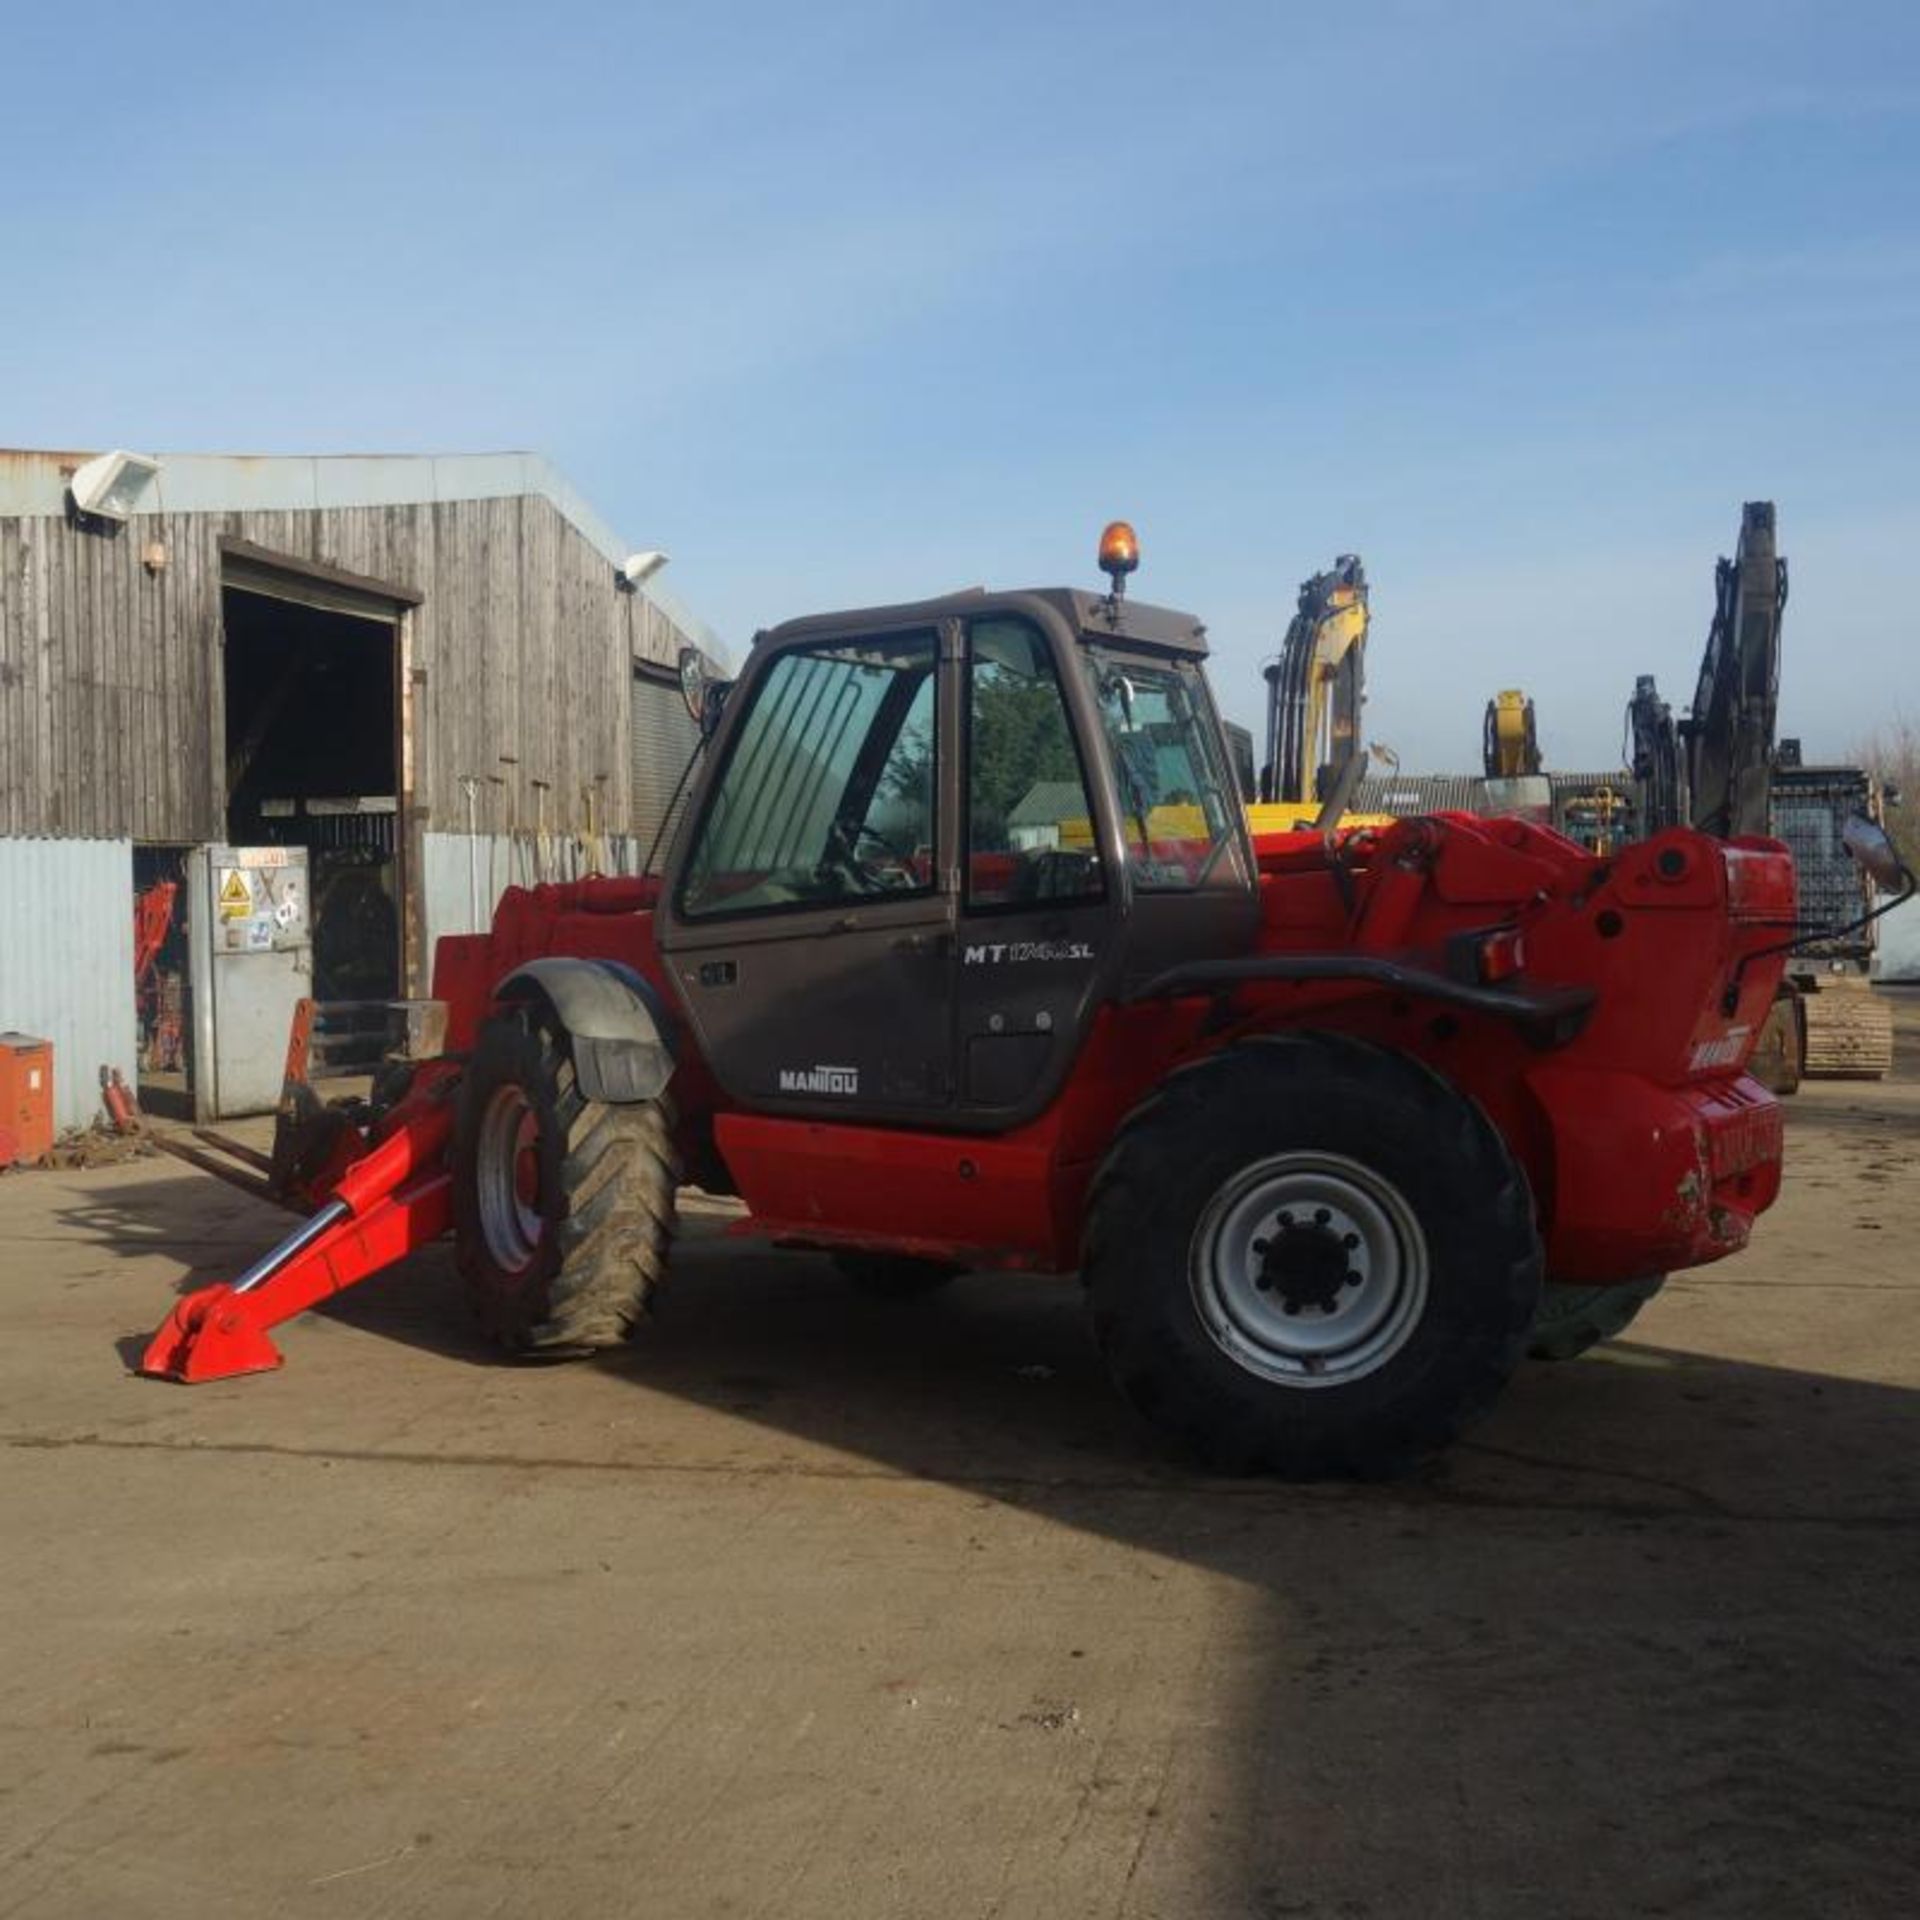 2004 Manitou MT1740SL Telehandler, 6844 Hours From New - Image 2 of 6